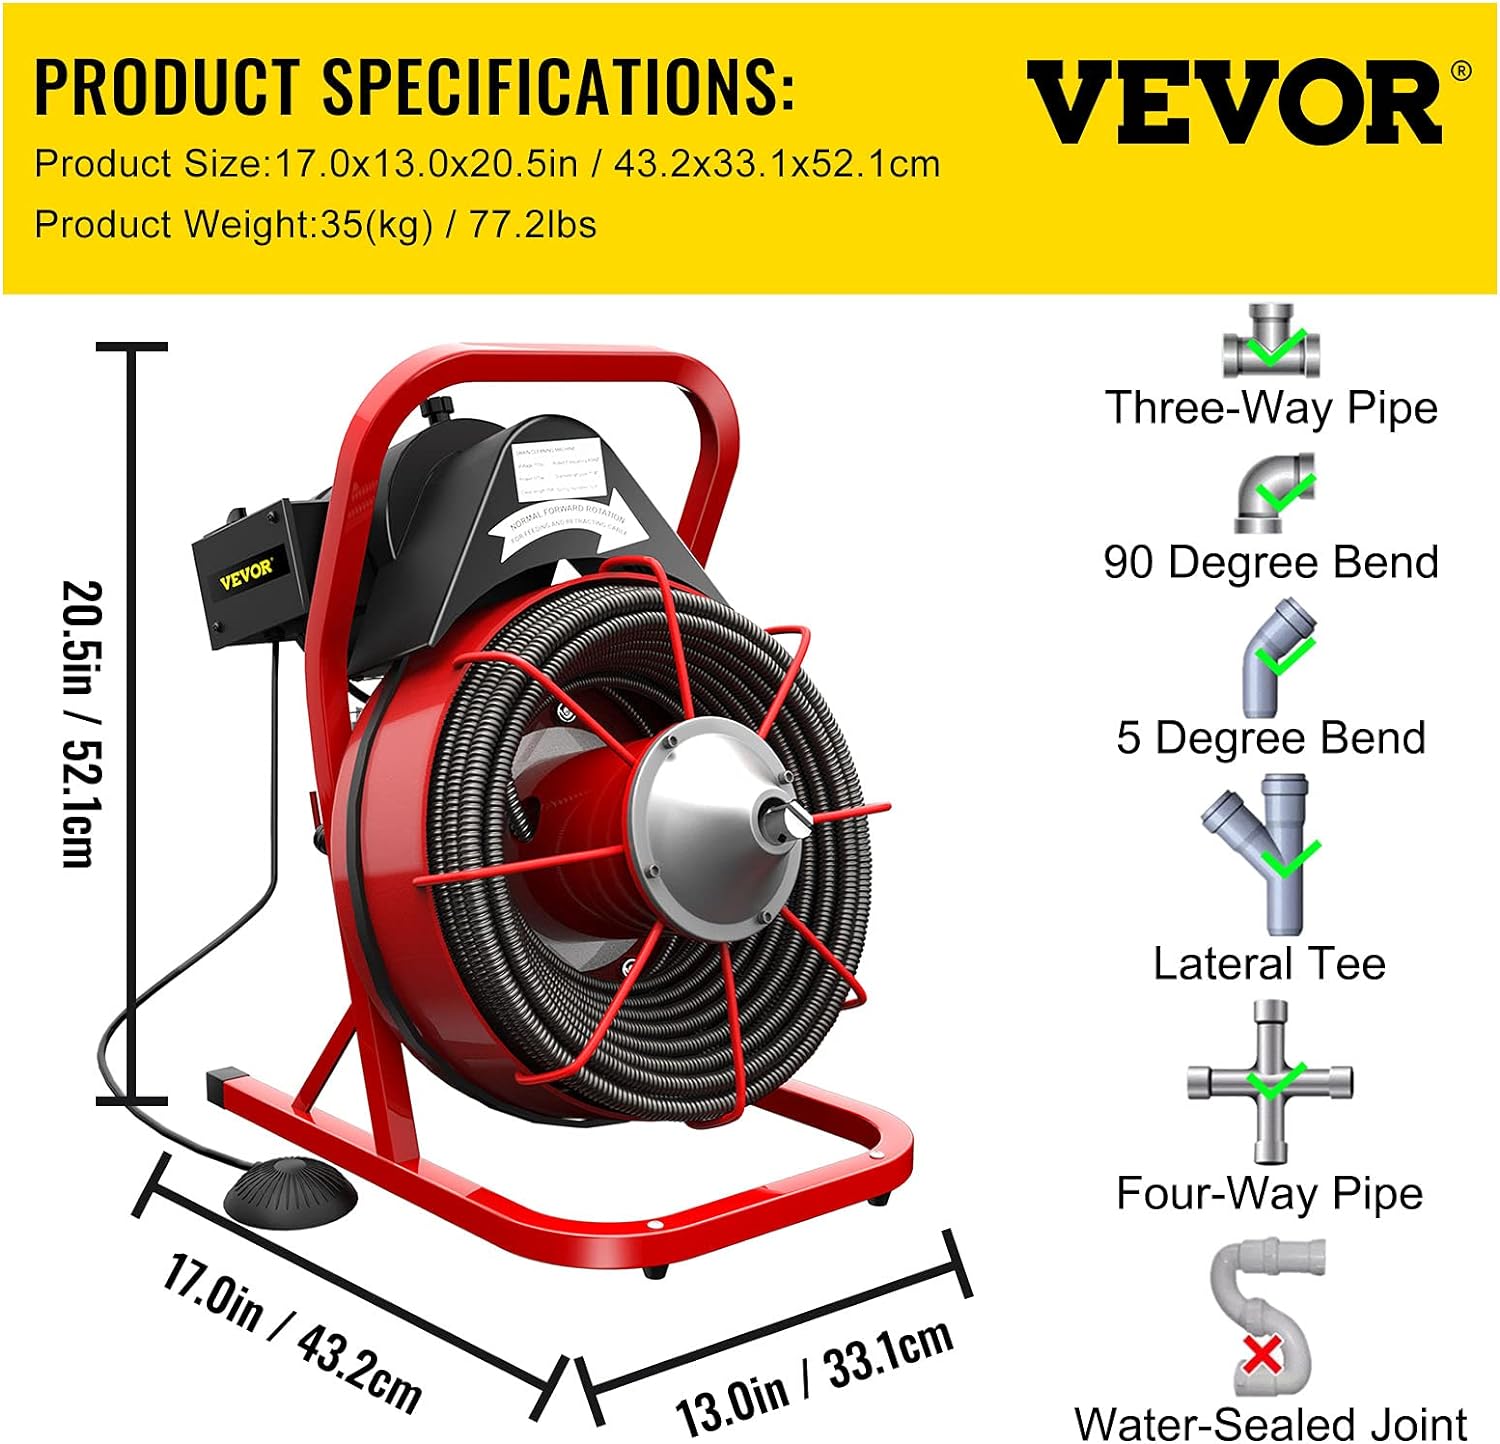 VEVOR Drain Cleaner Machine, 75 Ft x 1/2 Inch Drain Cleaning Machine Fits 1 to 4 Inch Pipes, Portable Drain Auger Cleaner with 4 Cutters, Electric Drain Clog Remover Plumbing Tool